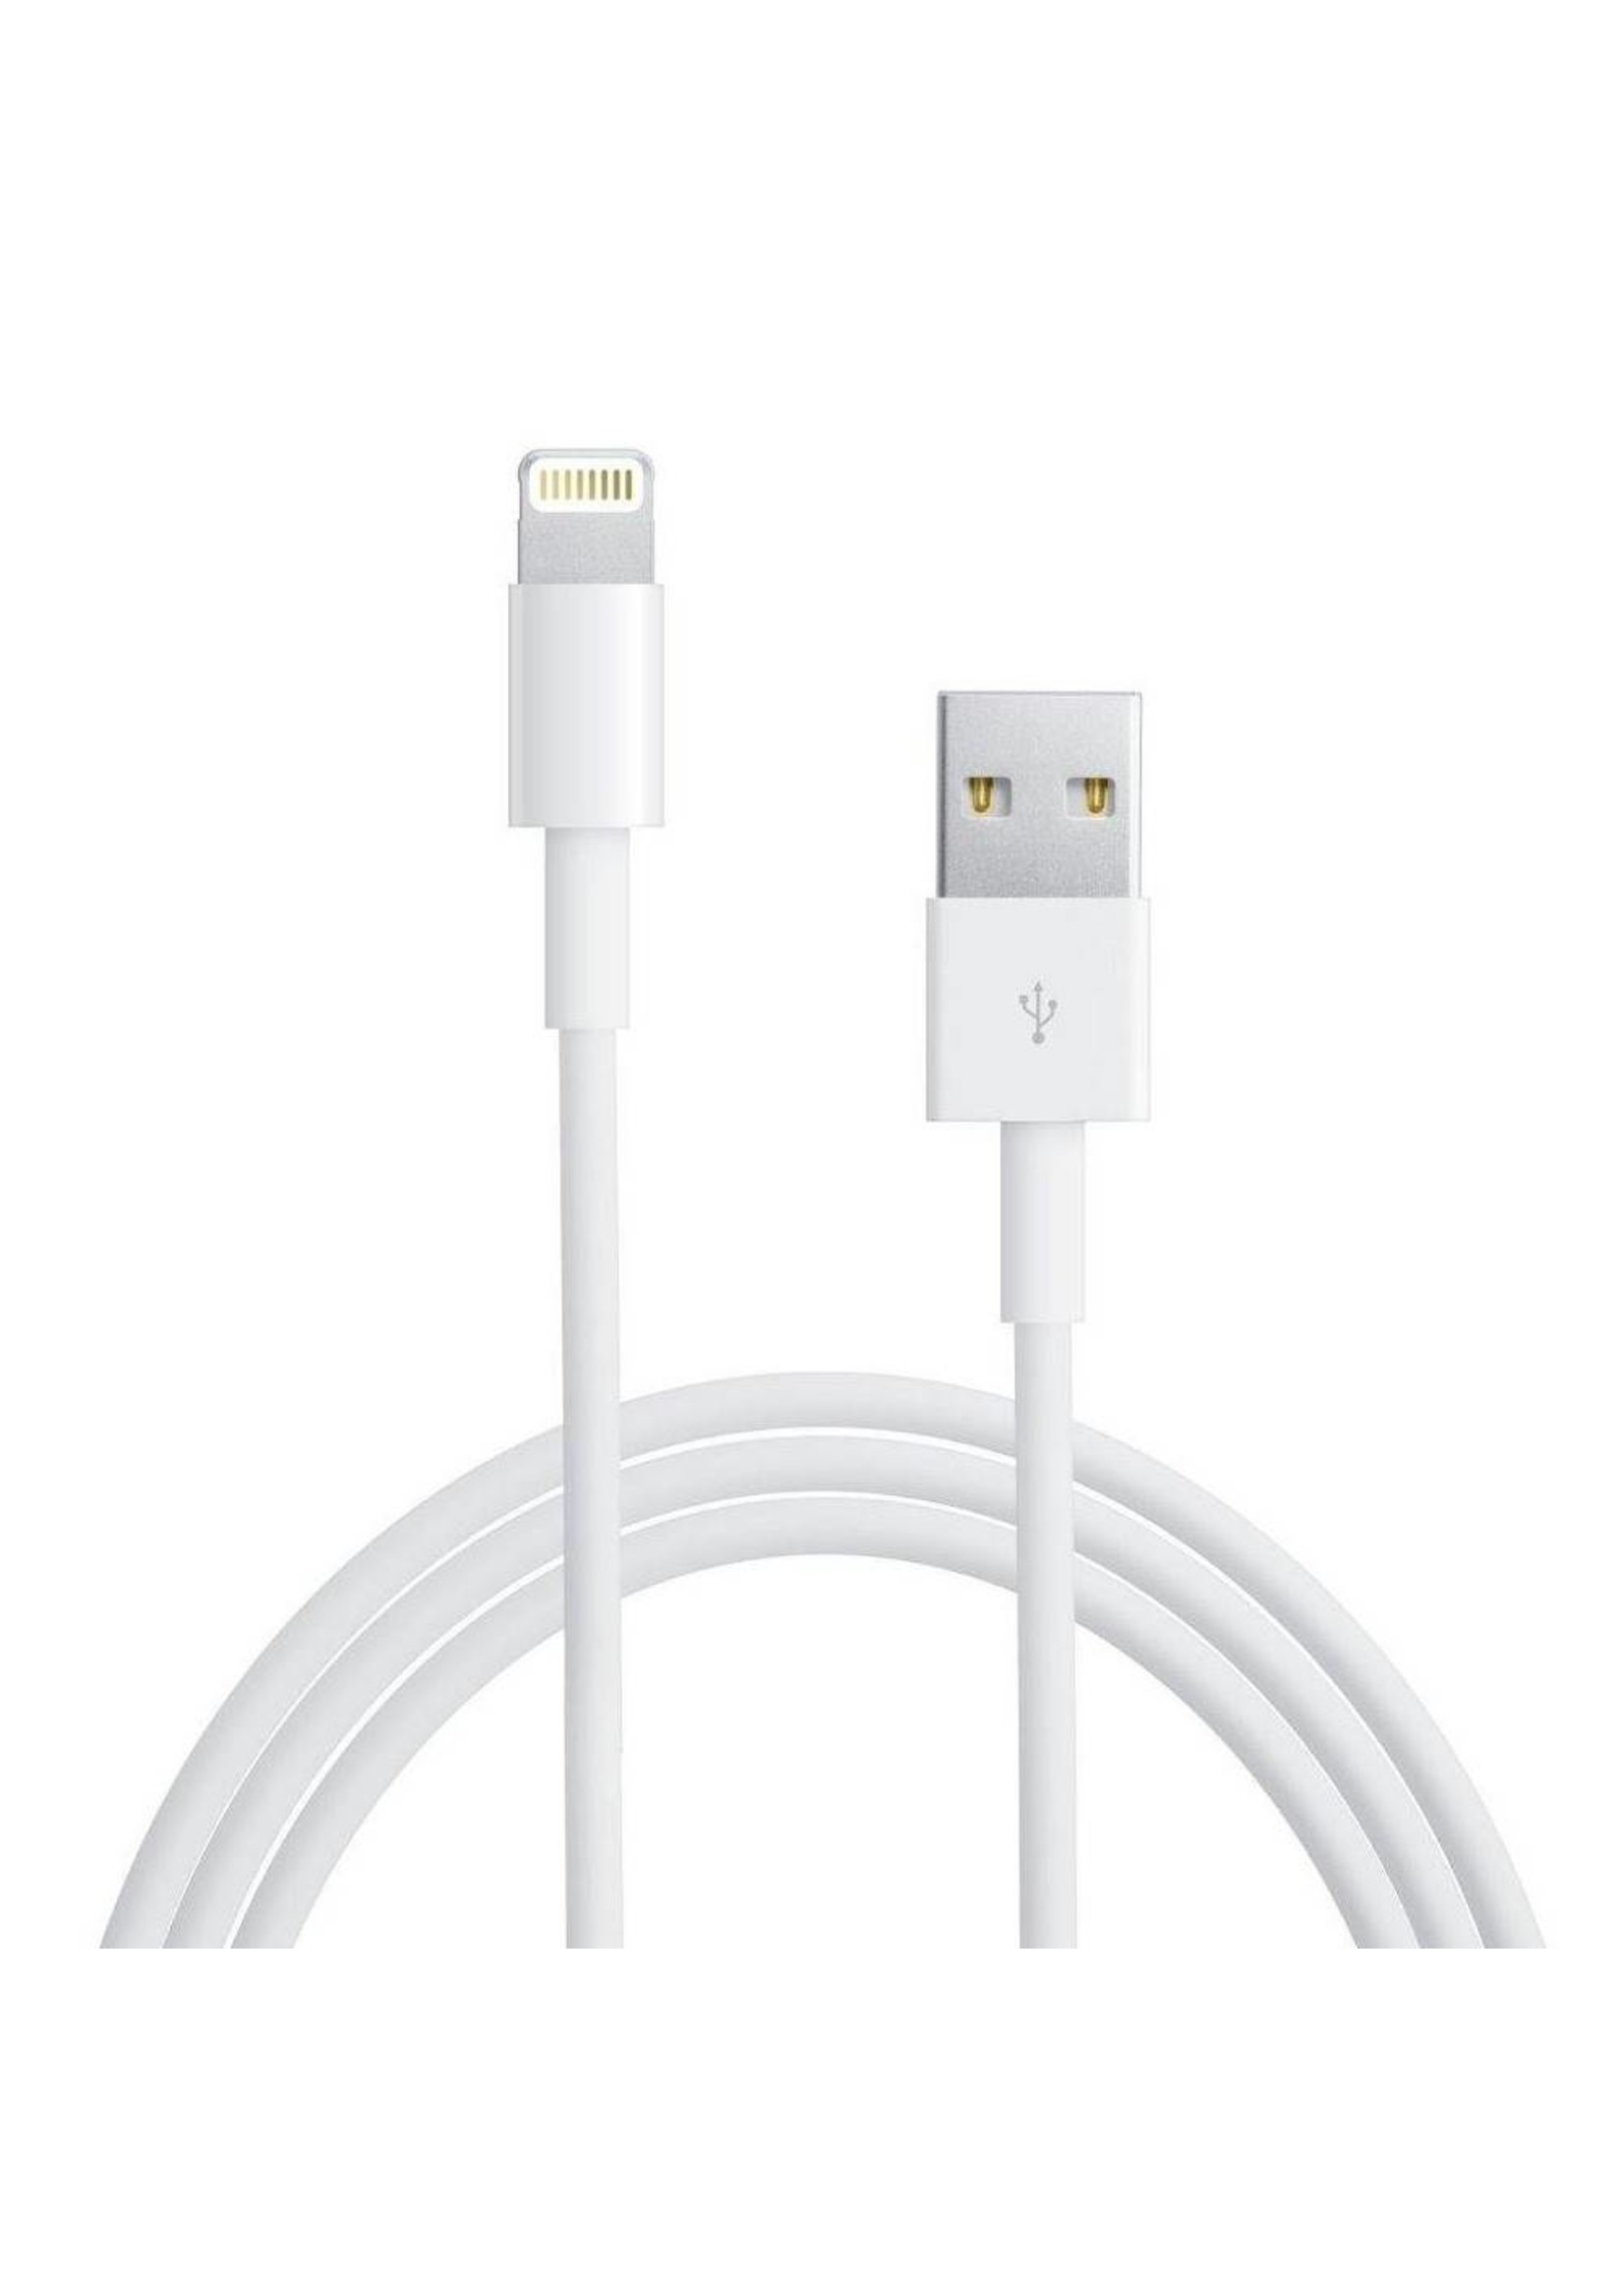 Apple WAKE Apple USB 8 pin Lighting 5ft/1m Braided Cable